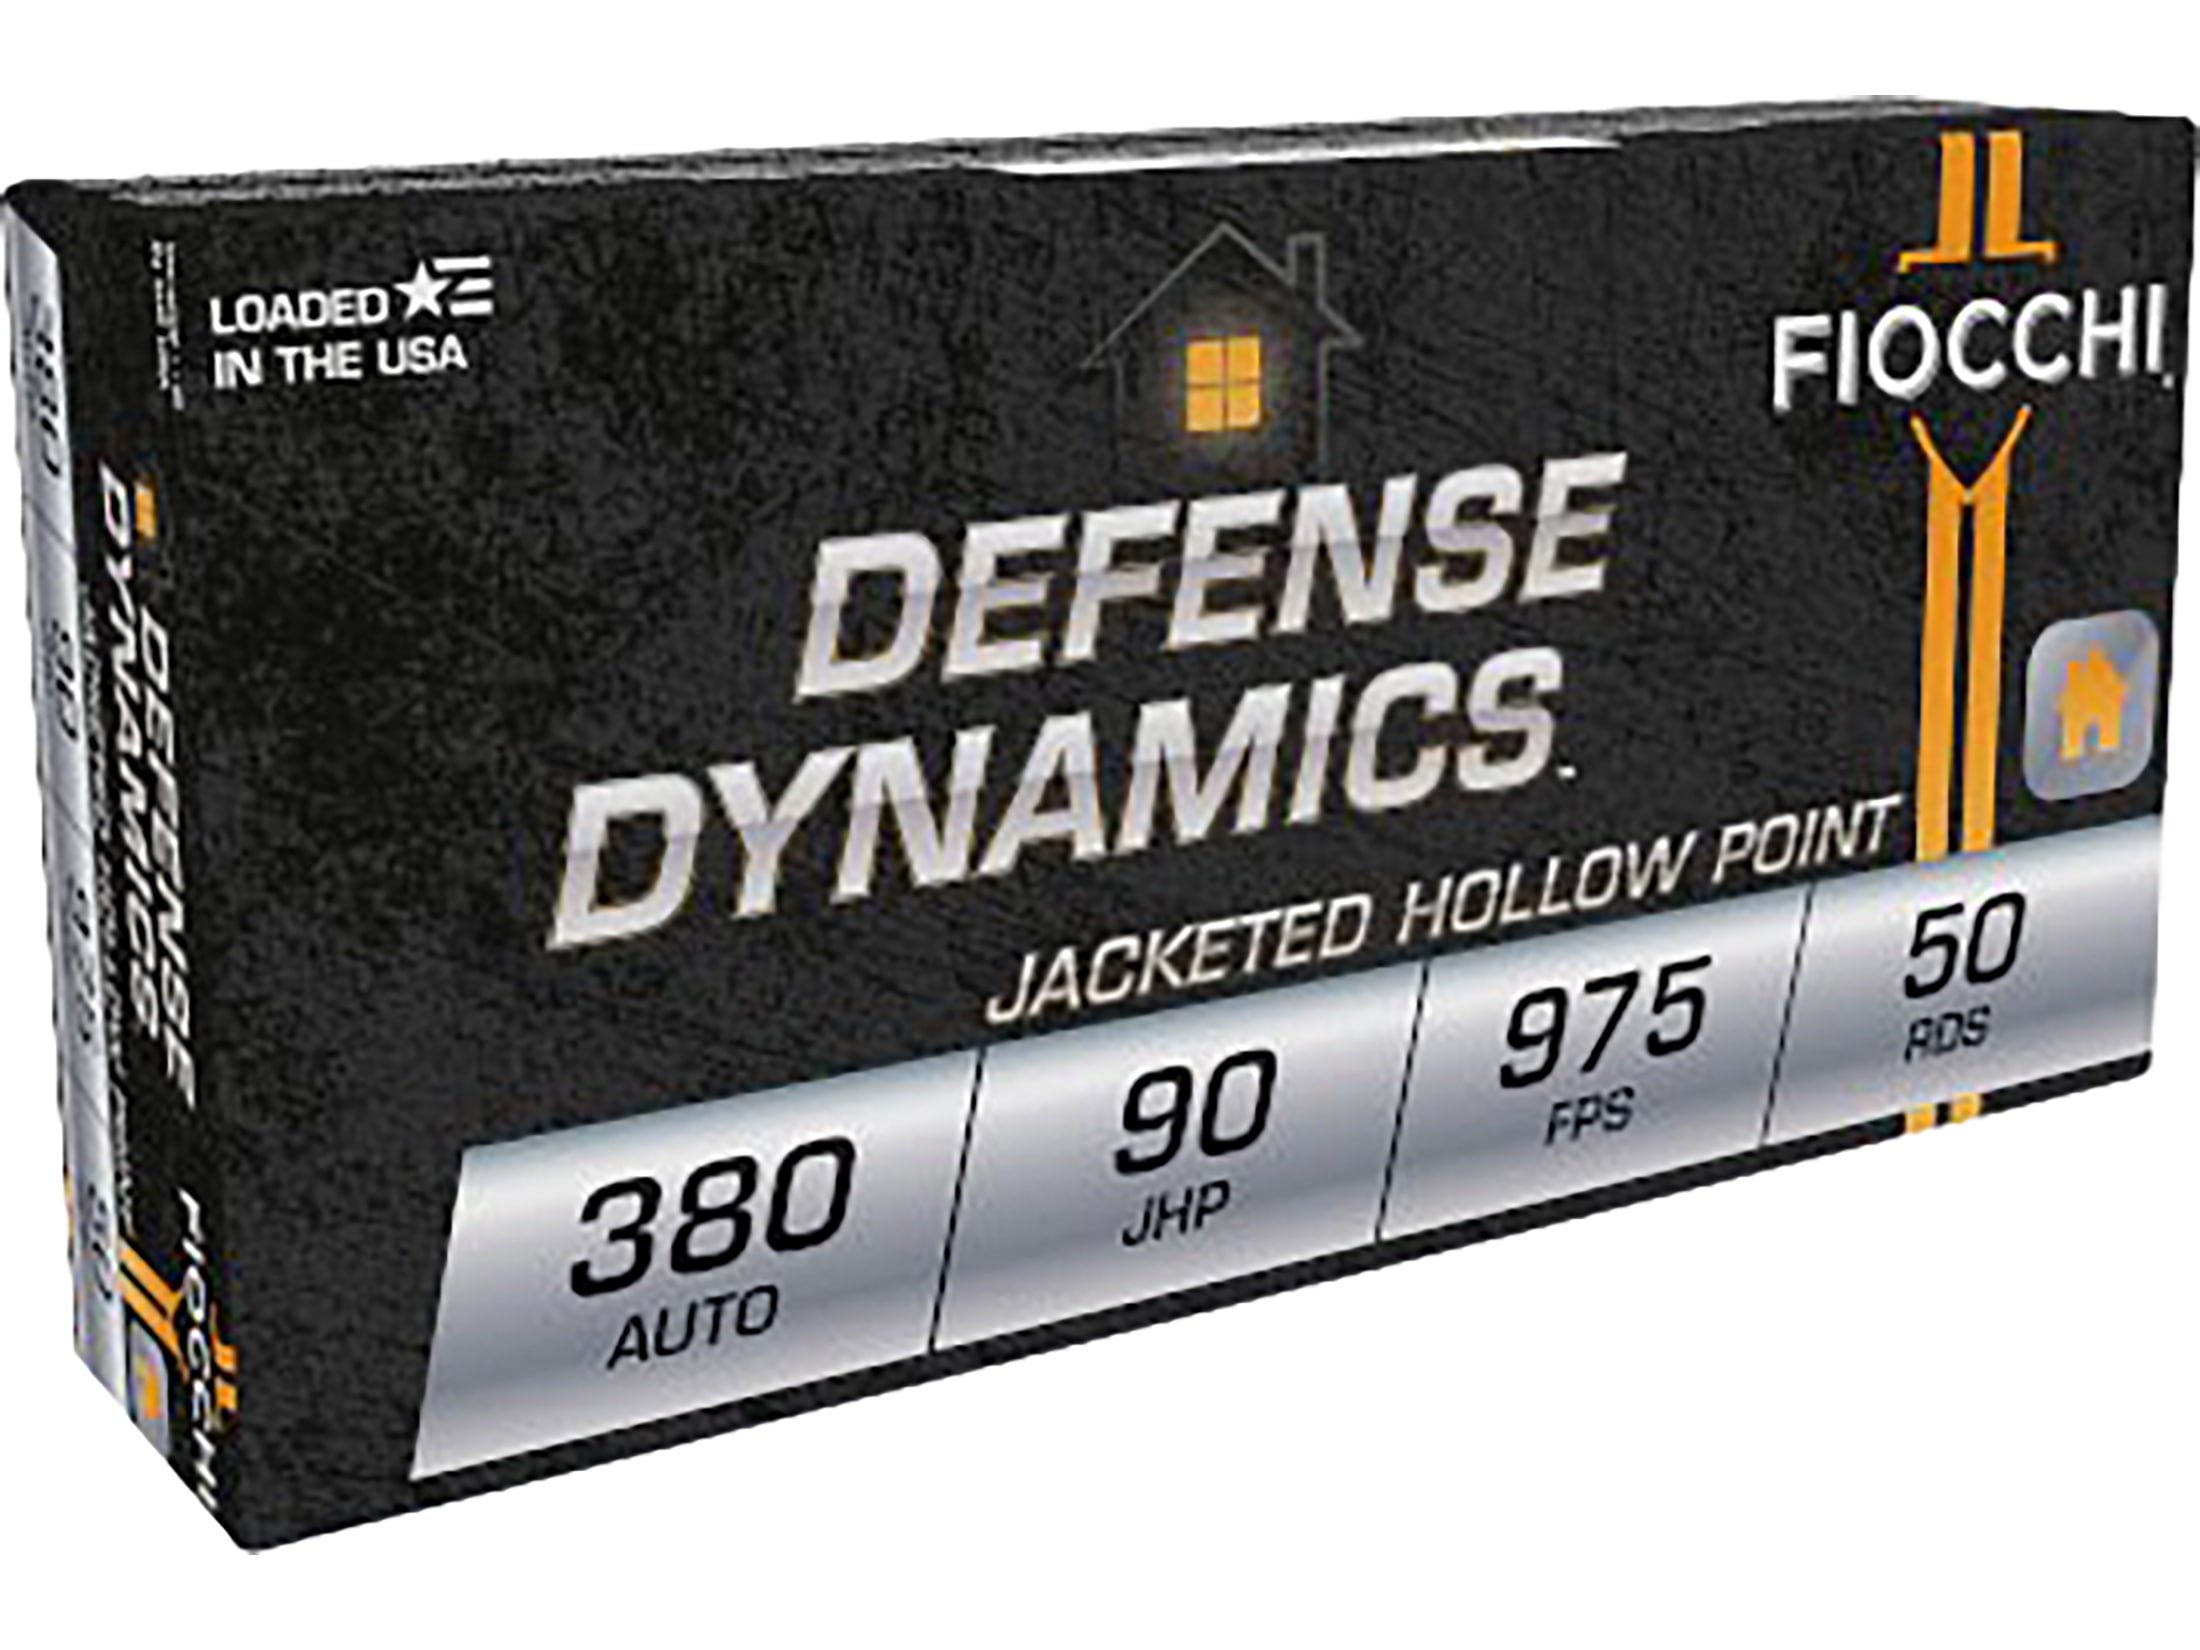 Fiocchi Shooting Dynamics Ammo 380 ACP 90 Grain Jacketed Hollow Point.